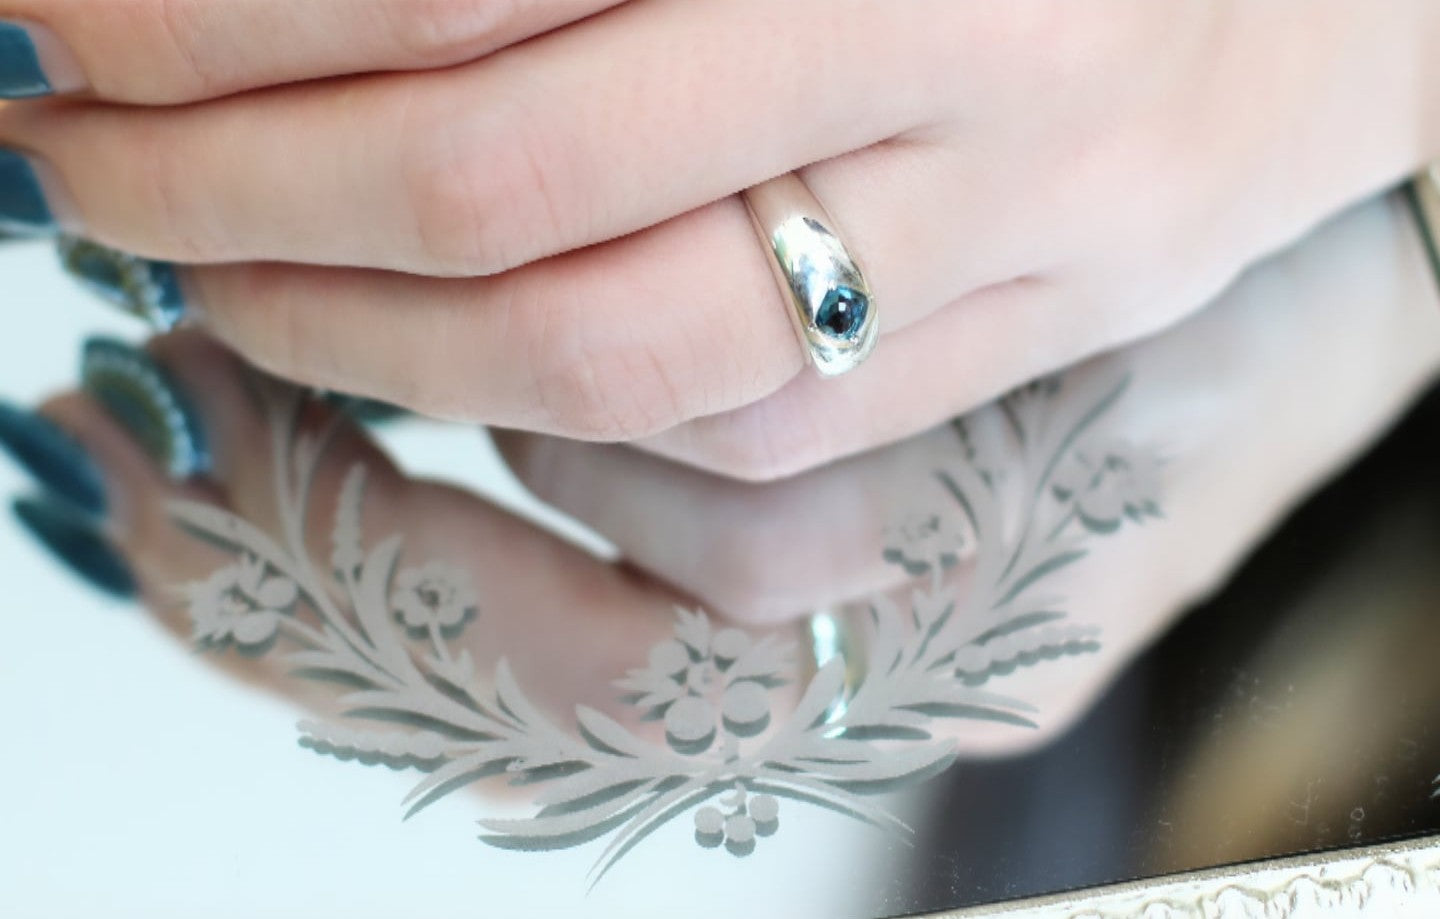 voluminous silver ring with gem stone